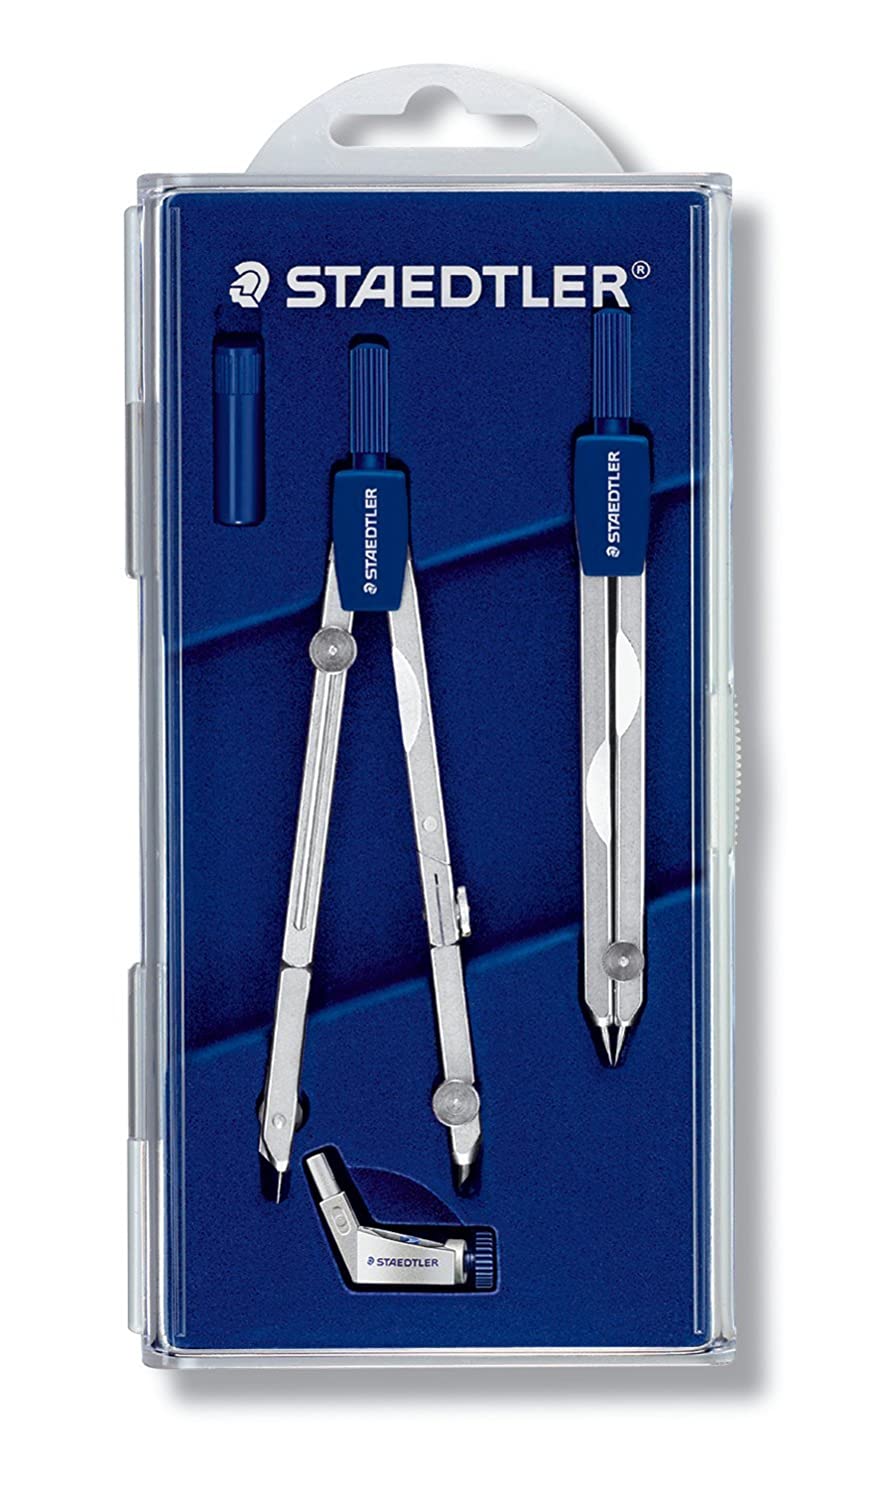 Detec™ Staedtler Mars 554 Basic Compass with Universal Adapter, Divider and Spares Box